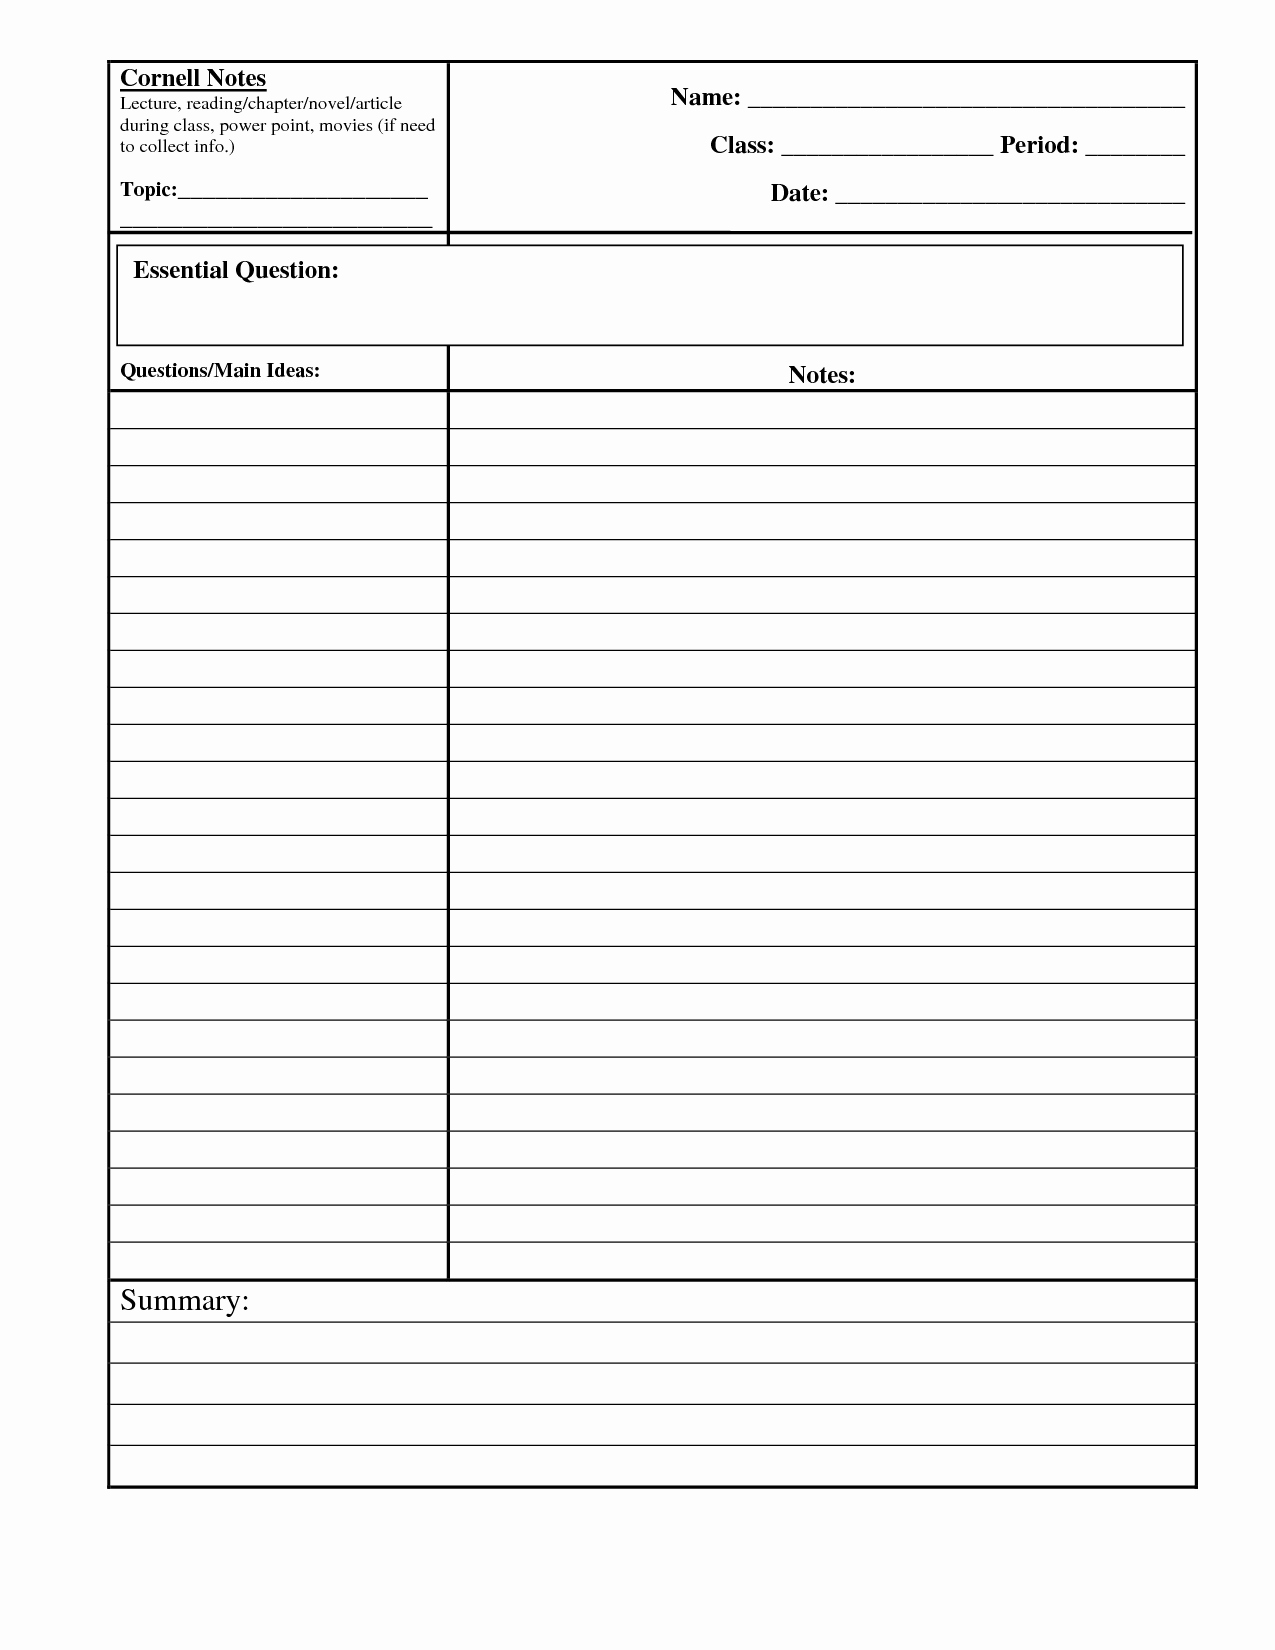 Note Taking Template Word Awesome Cornell Notes Template Word Beepmunk